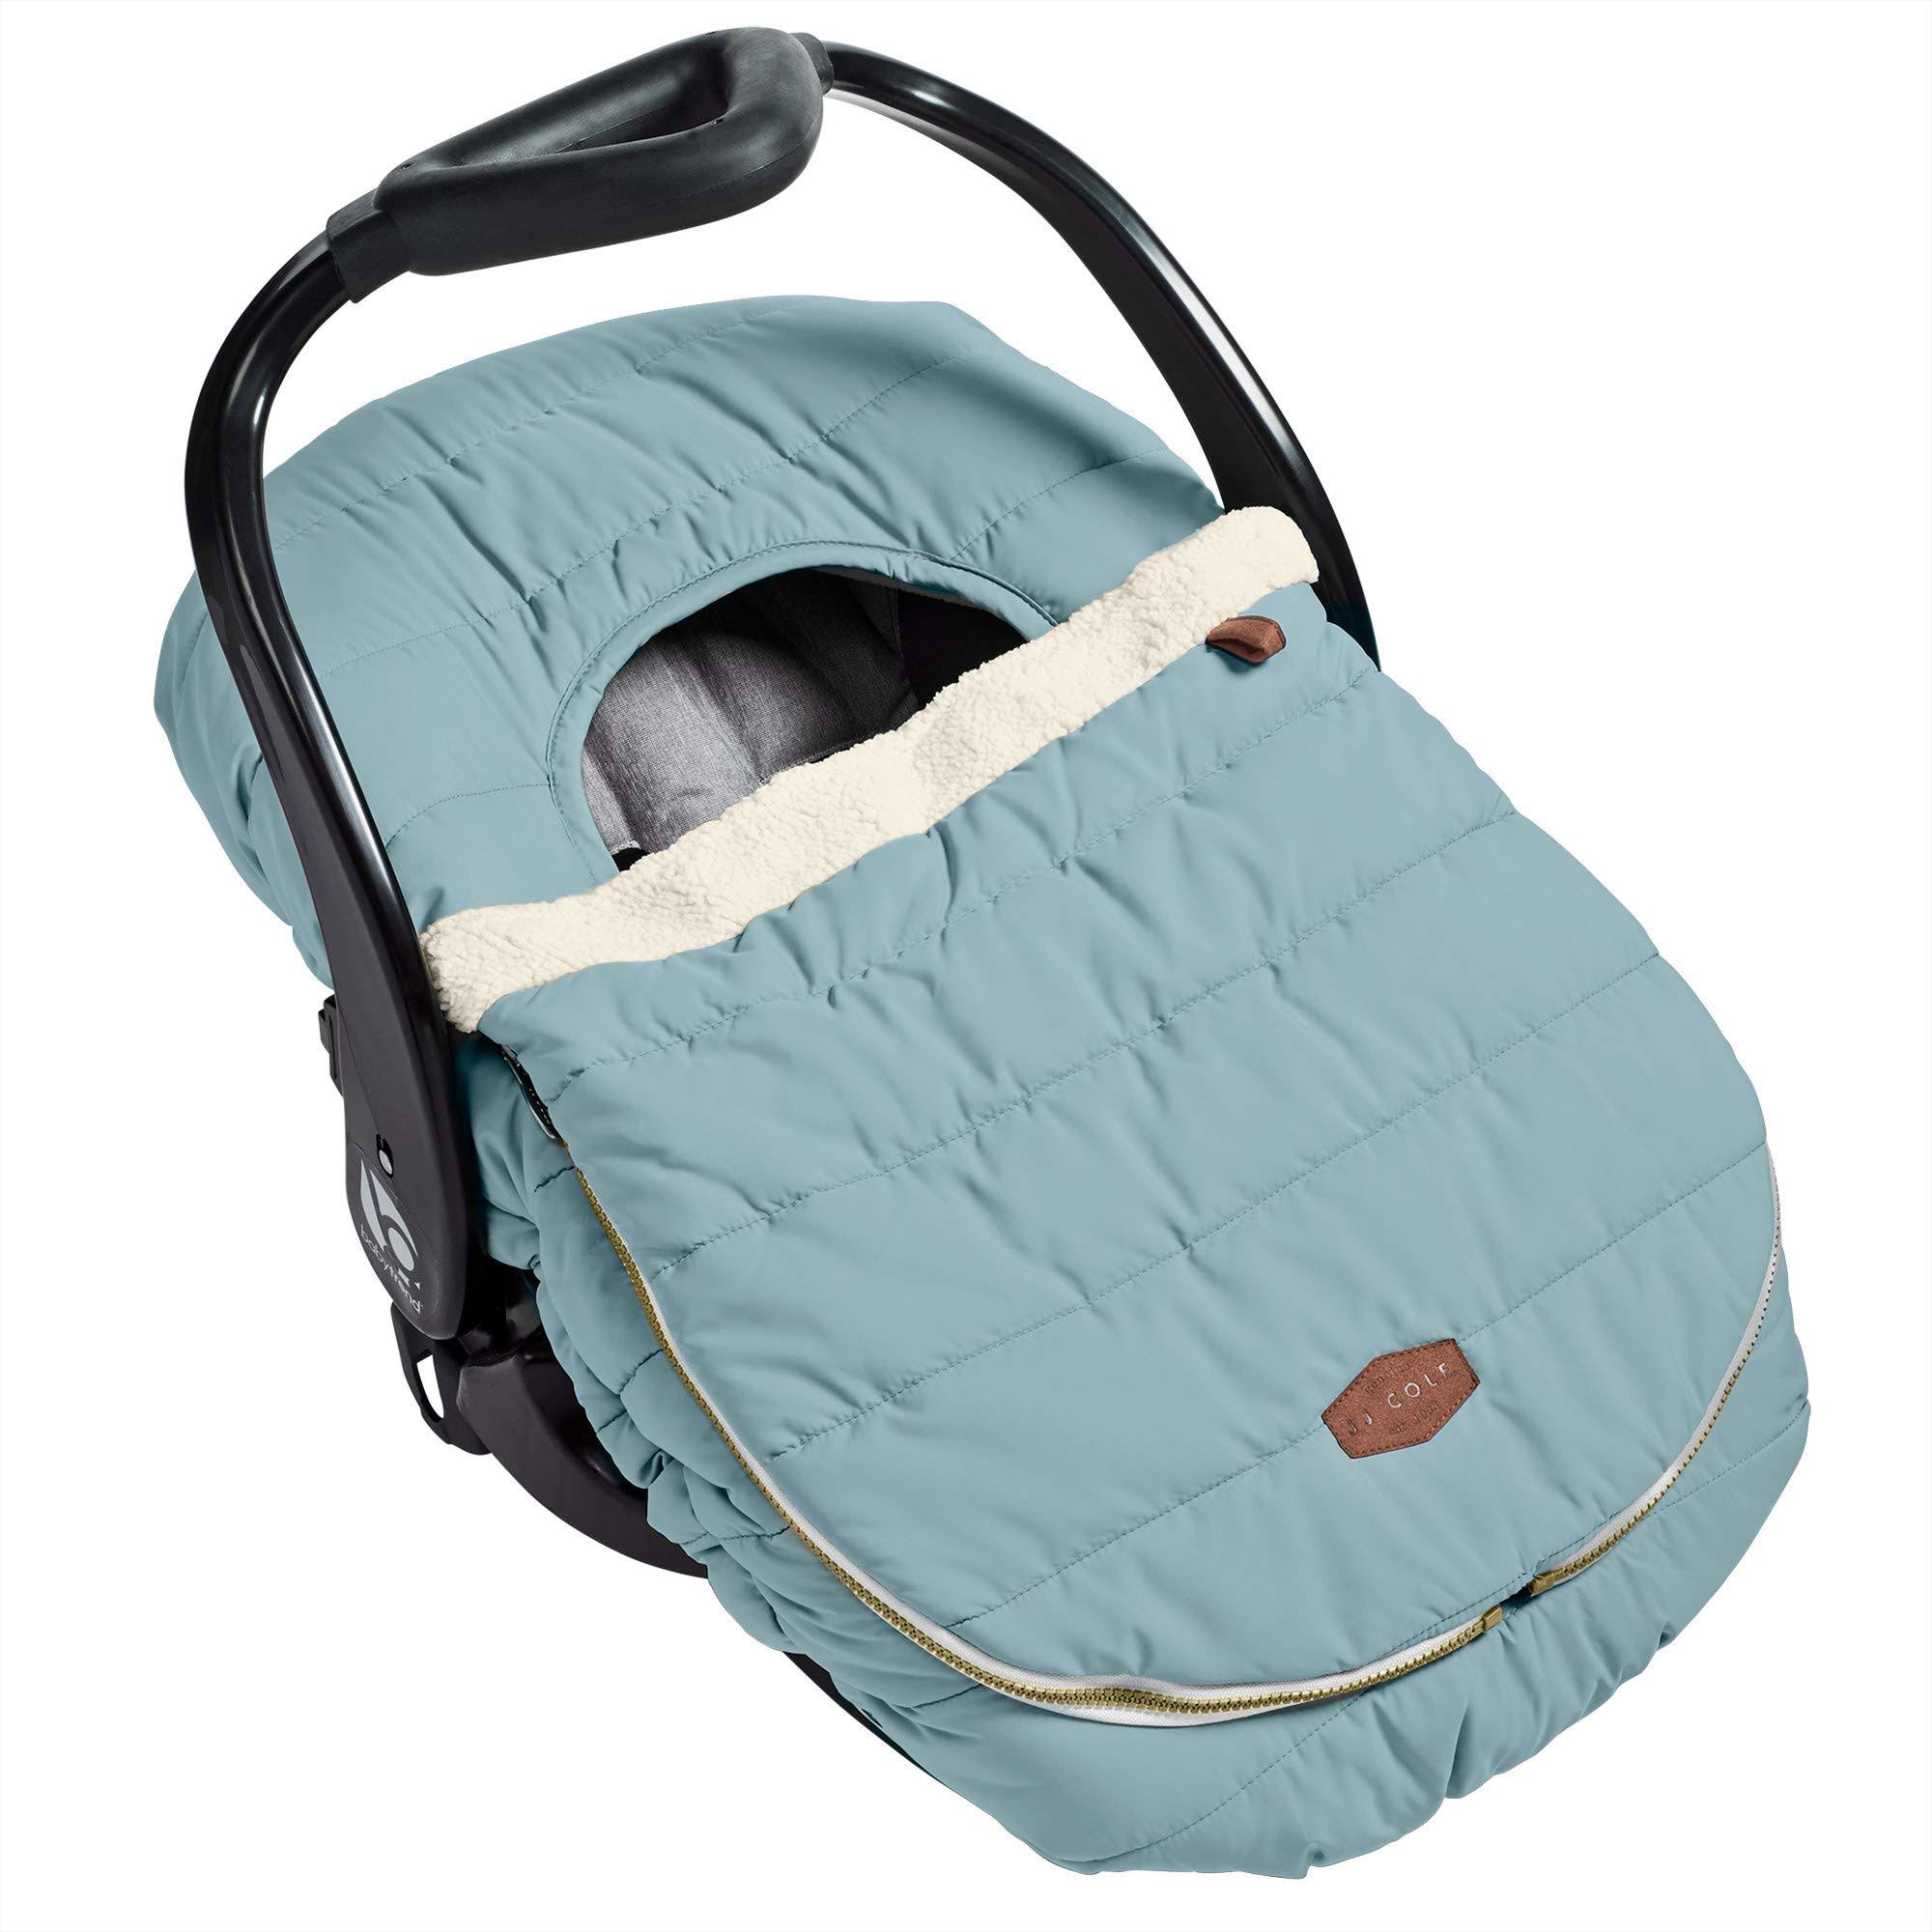 JJ Cole Baby Car Seat Cover, Blanket-Style Baby Stroller & Baby Carrier Cover, Slate